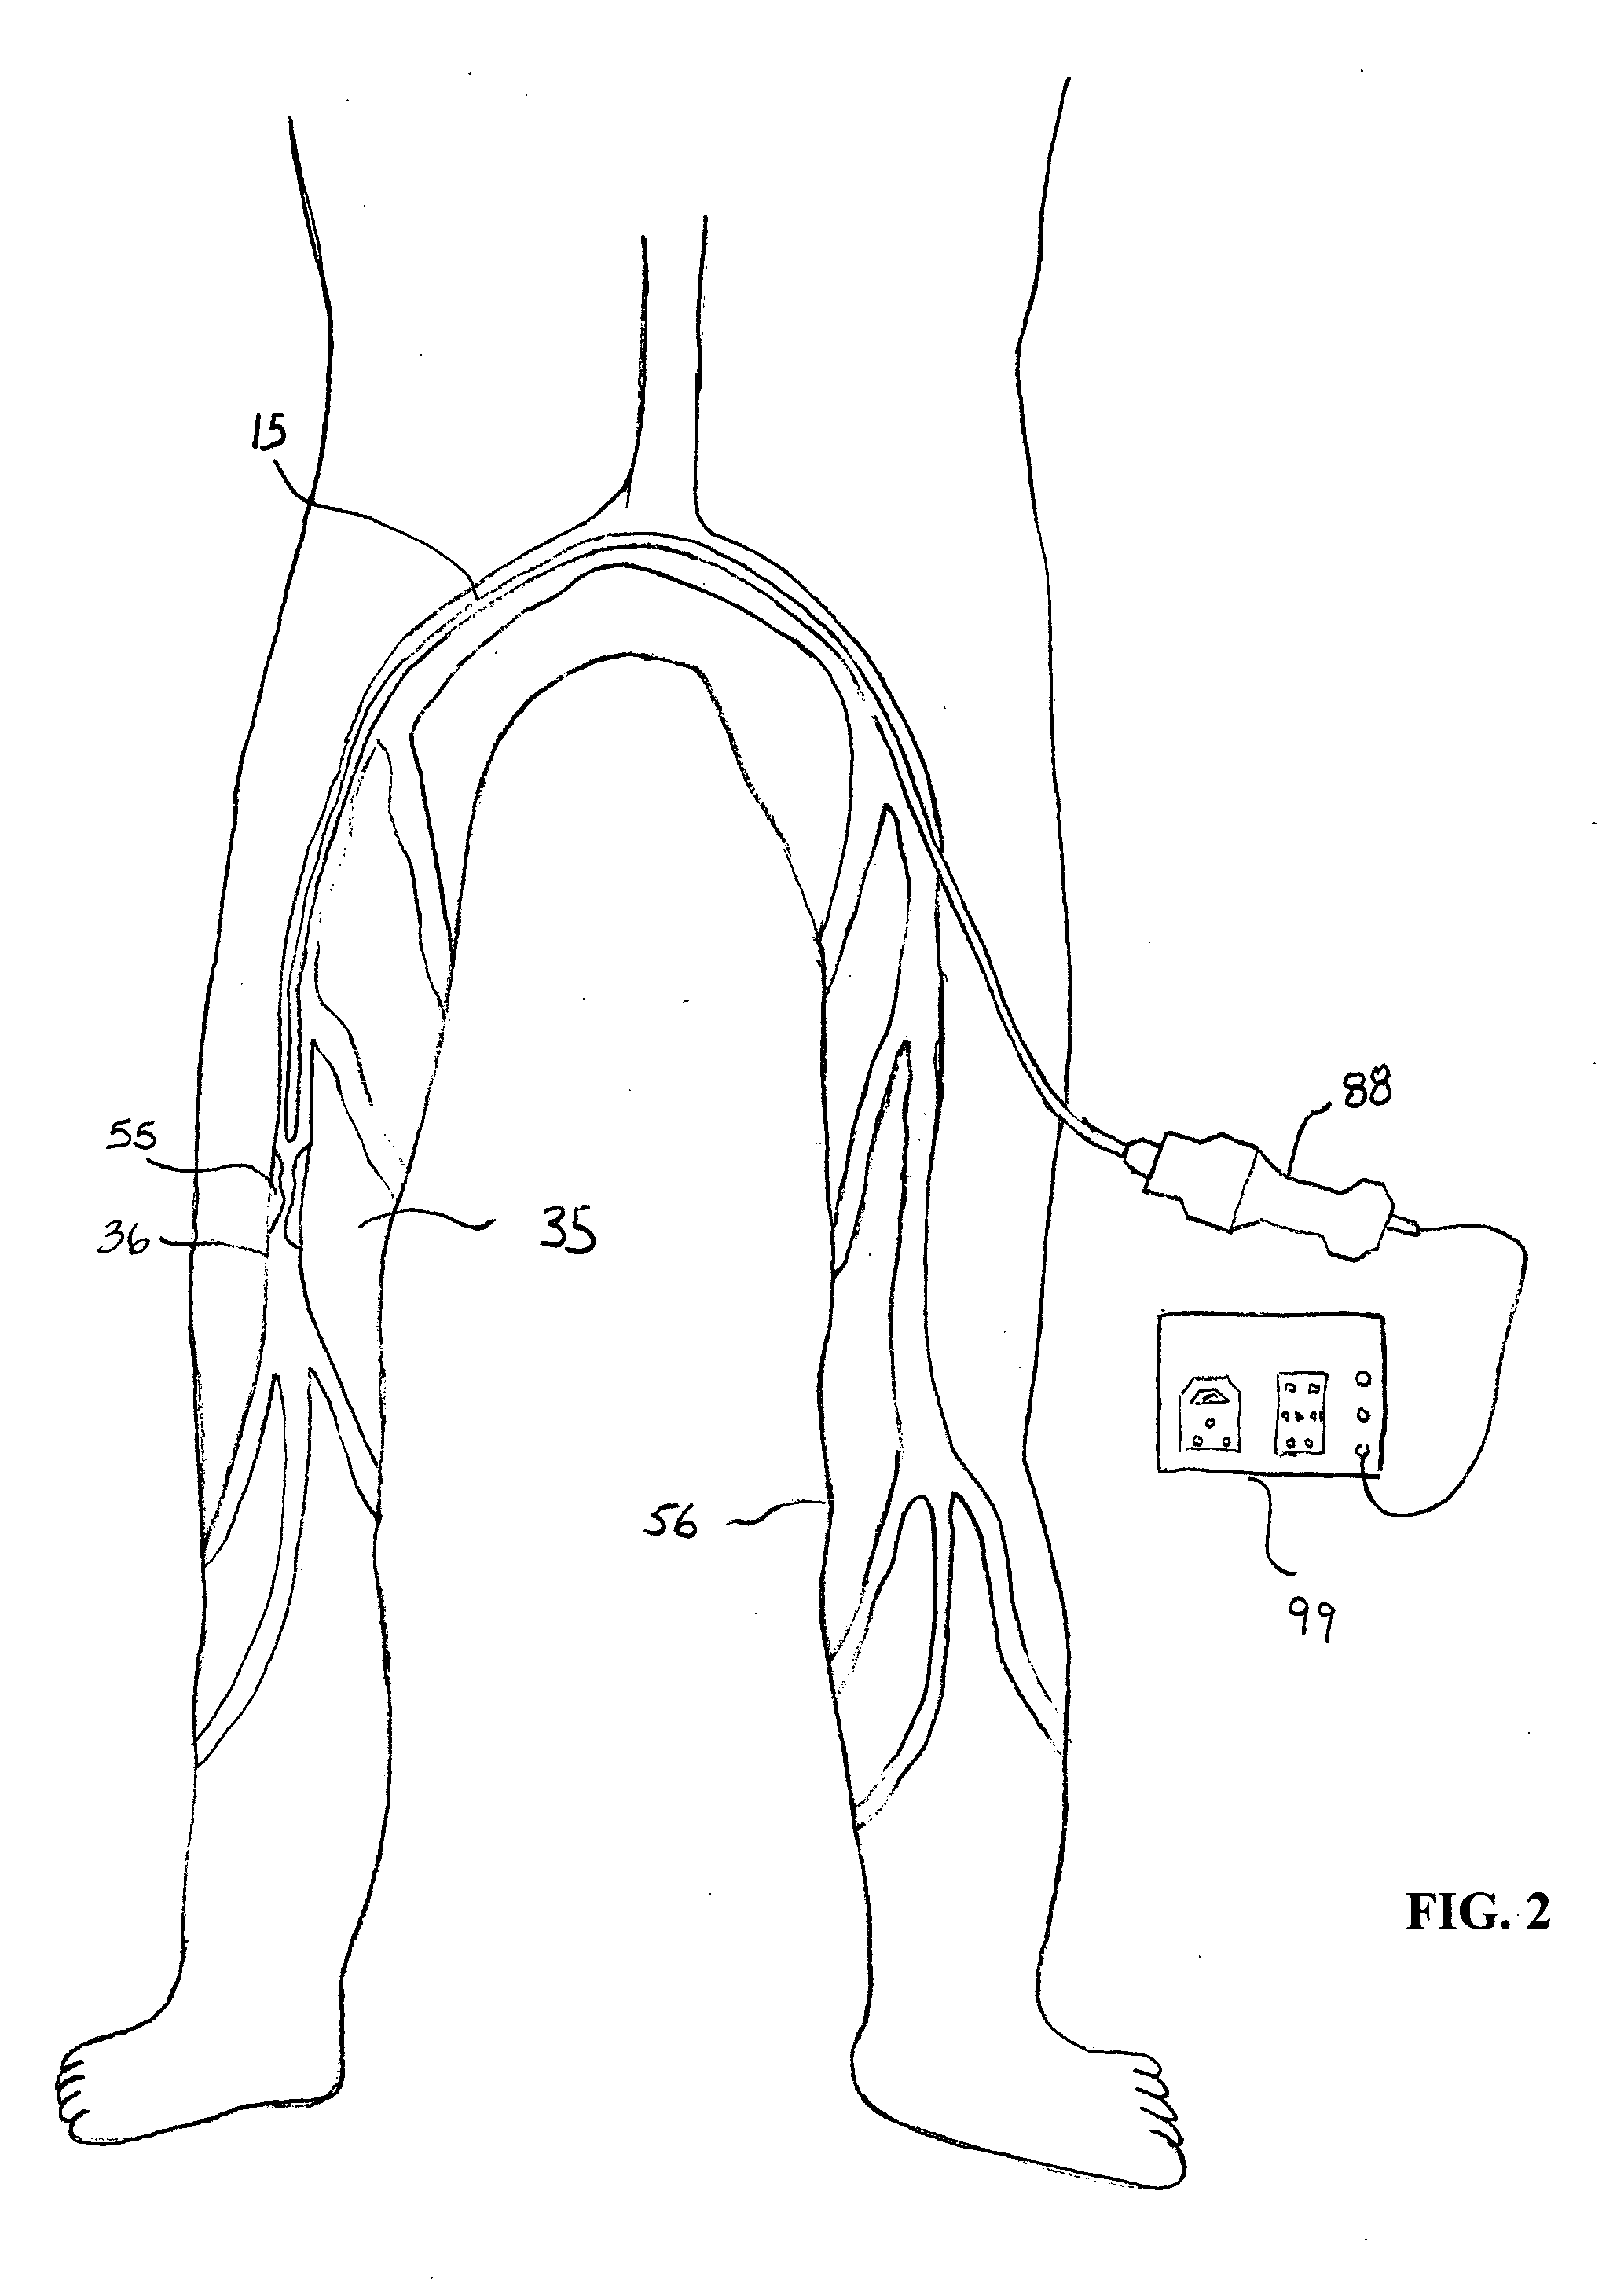 Apparatus and method for an ultrasonic medical device to treat peripheral artery disease